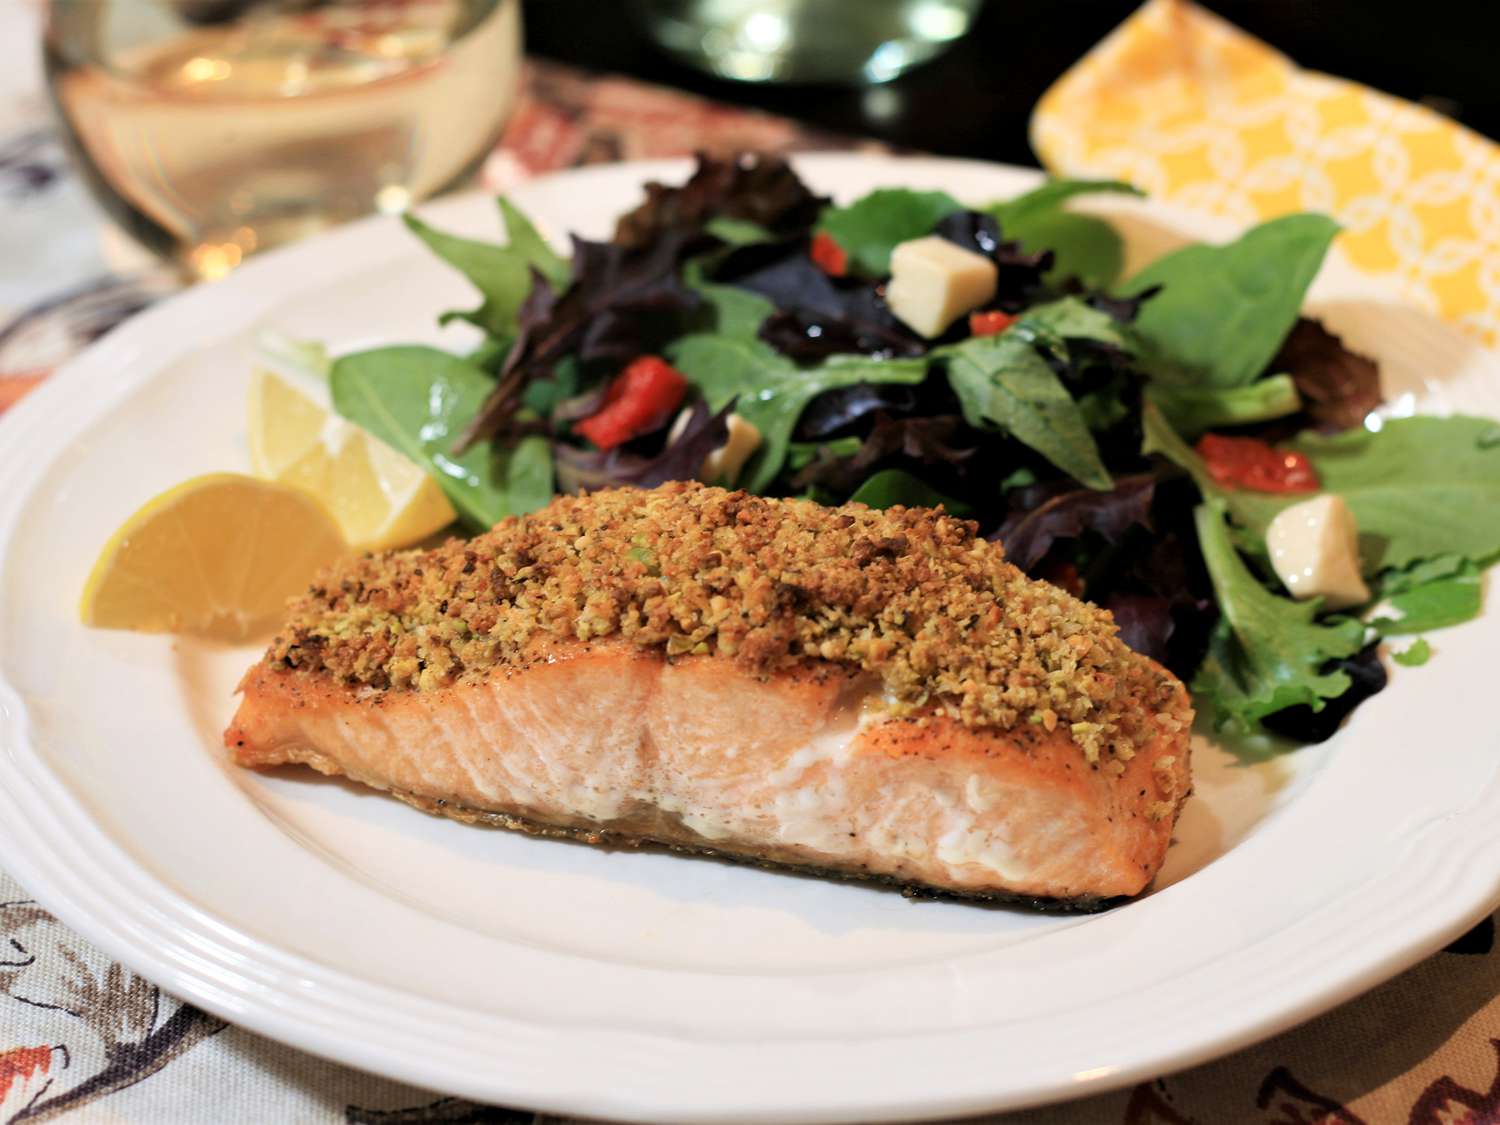 close up view of Pistachio-Crusted Salmon, served with salad and lemon wedges on a white plate